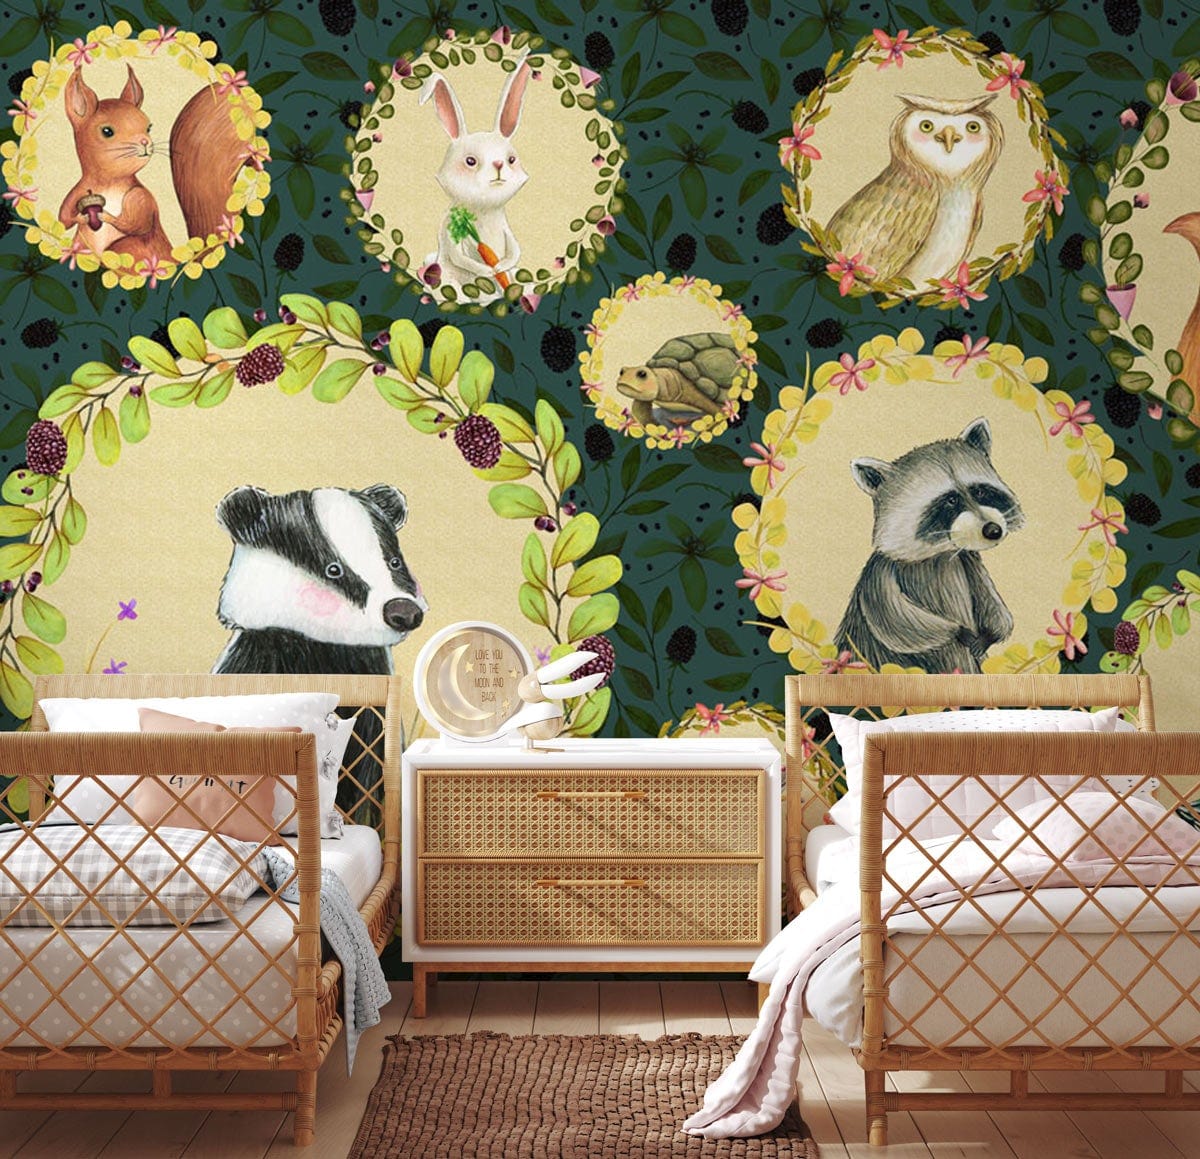 Decorate your bedroom with this whimsical animal portrait mural wallpaper!